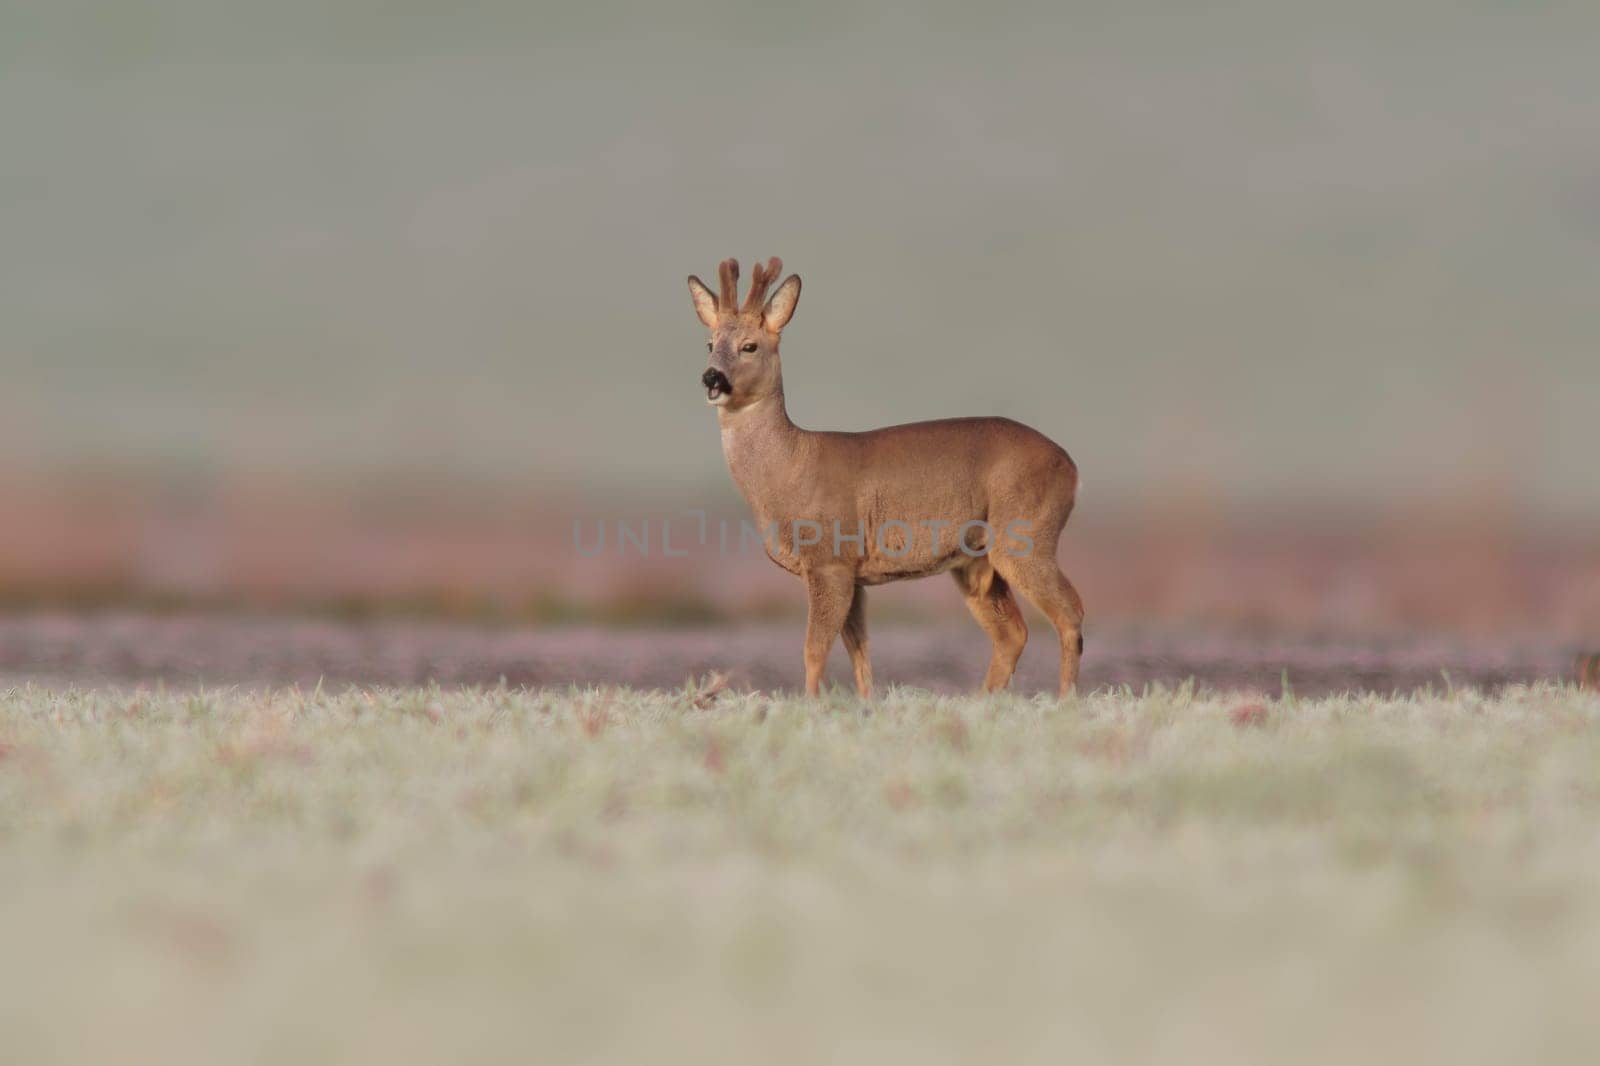 a young roebuck stands on a frozen field in winter